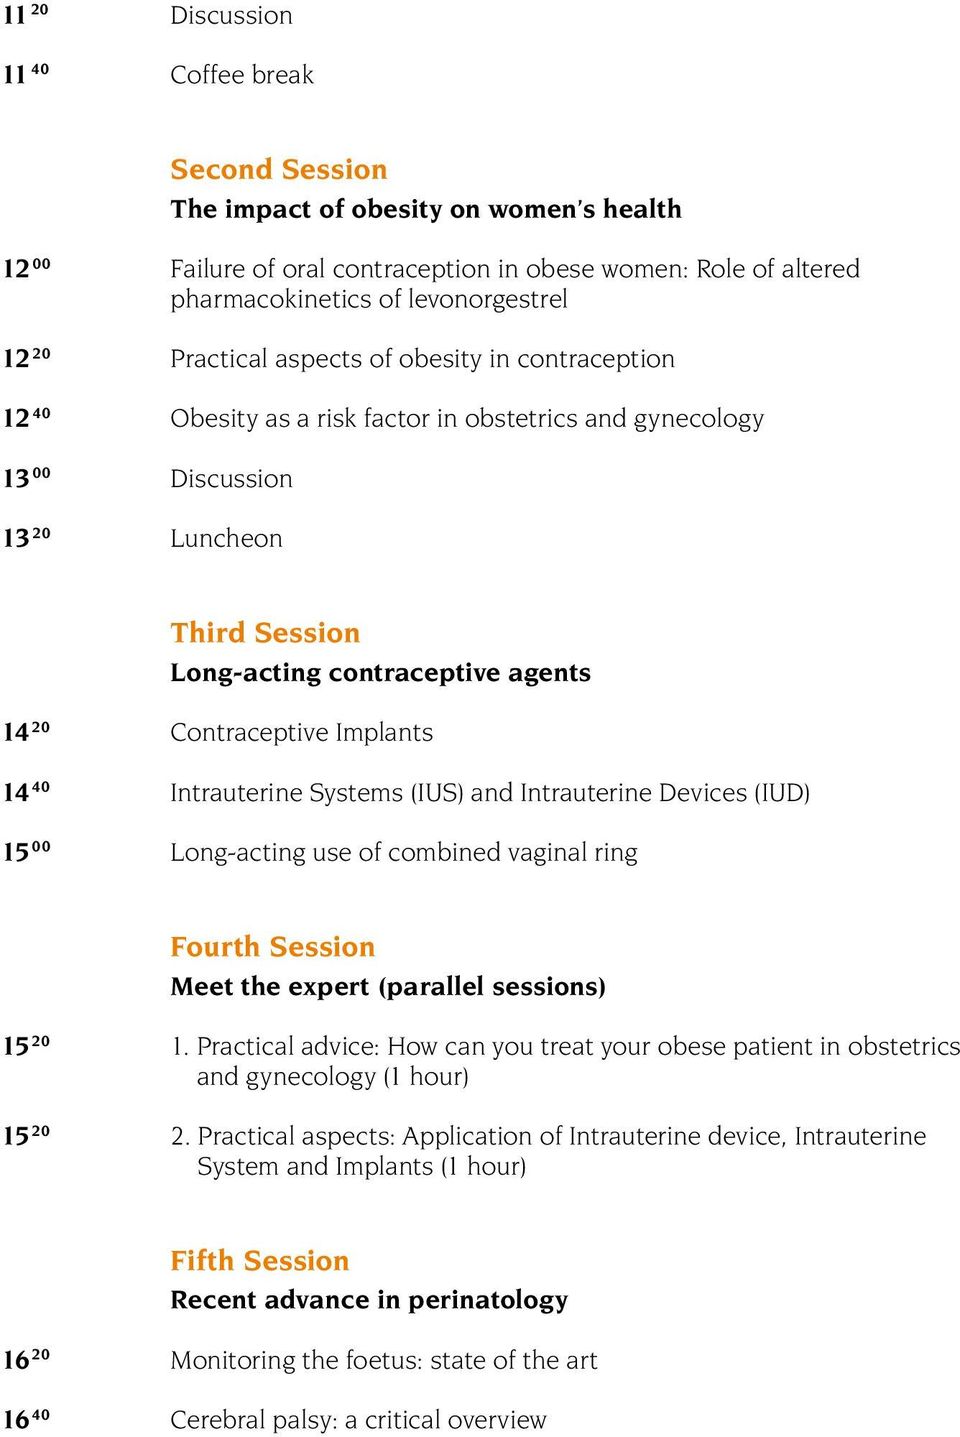 Contraceptive Implants 14 40 Intrauterine Systems (IUS) and Intrauterine Devices (IUD) 15 00 Long-acting use of combined vaginal ring Fourth Session Meet the expert (parallel sessions) 15 20 1.